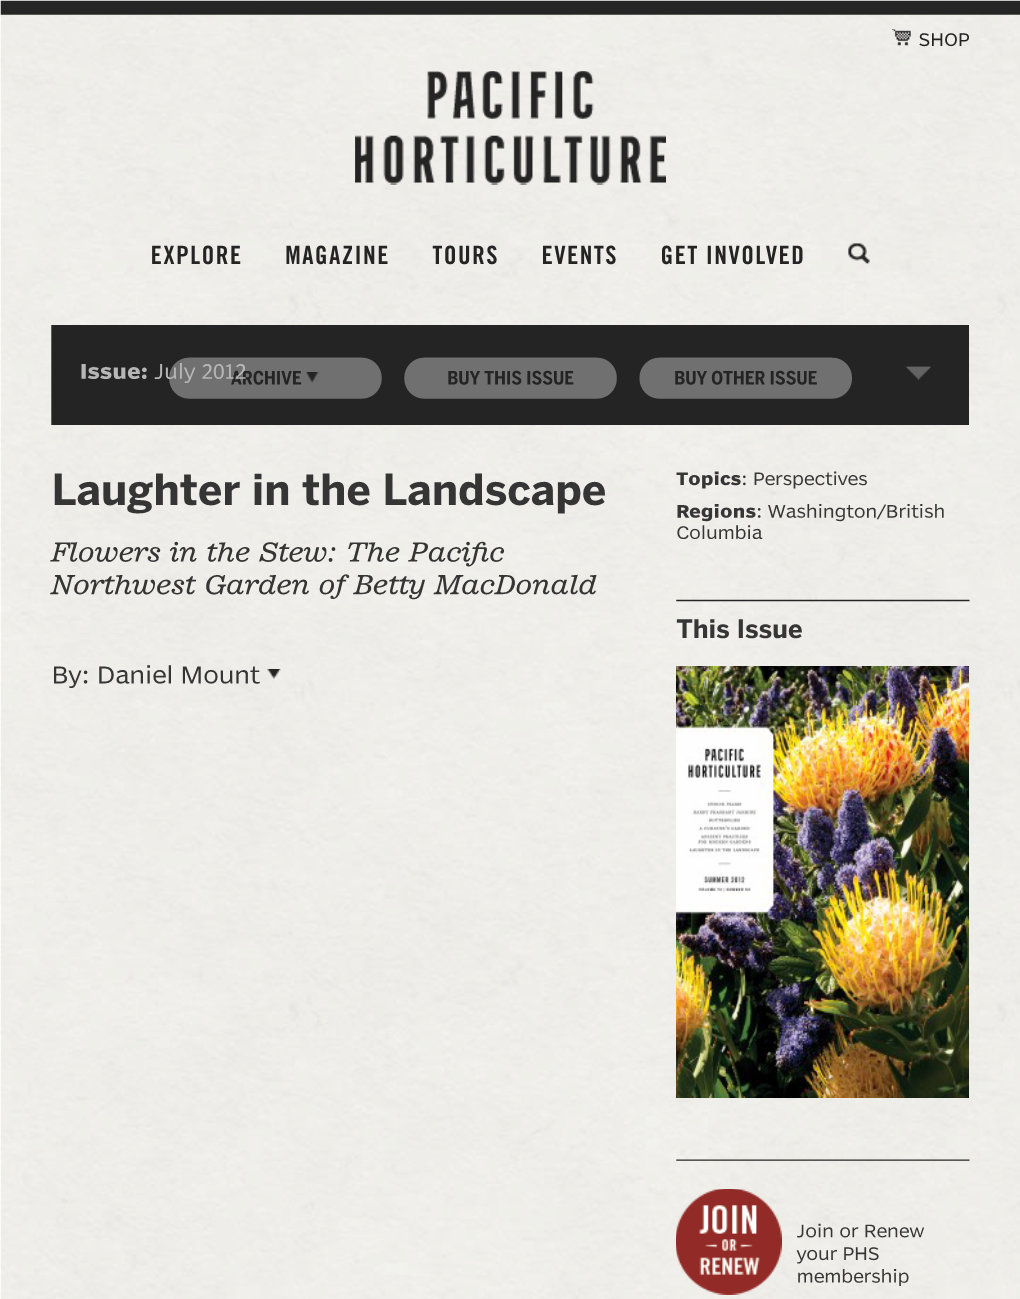 Laughter in the Landscape Regions: Washington/British Columbia Flowers in the Stew: the Paciﬁc Northwest Garden of Betty Macdonald This Issue By: Daniel Mount